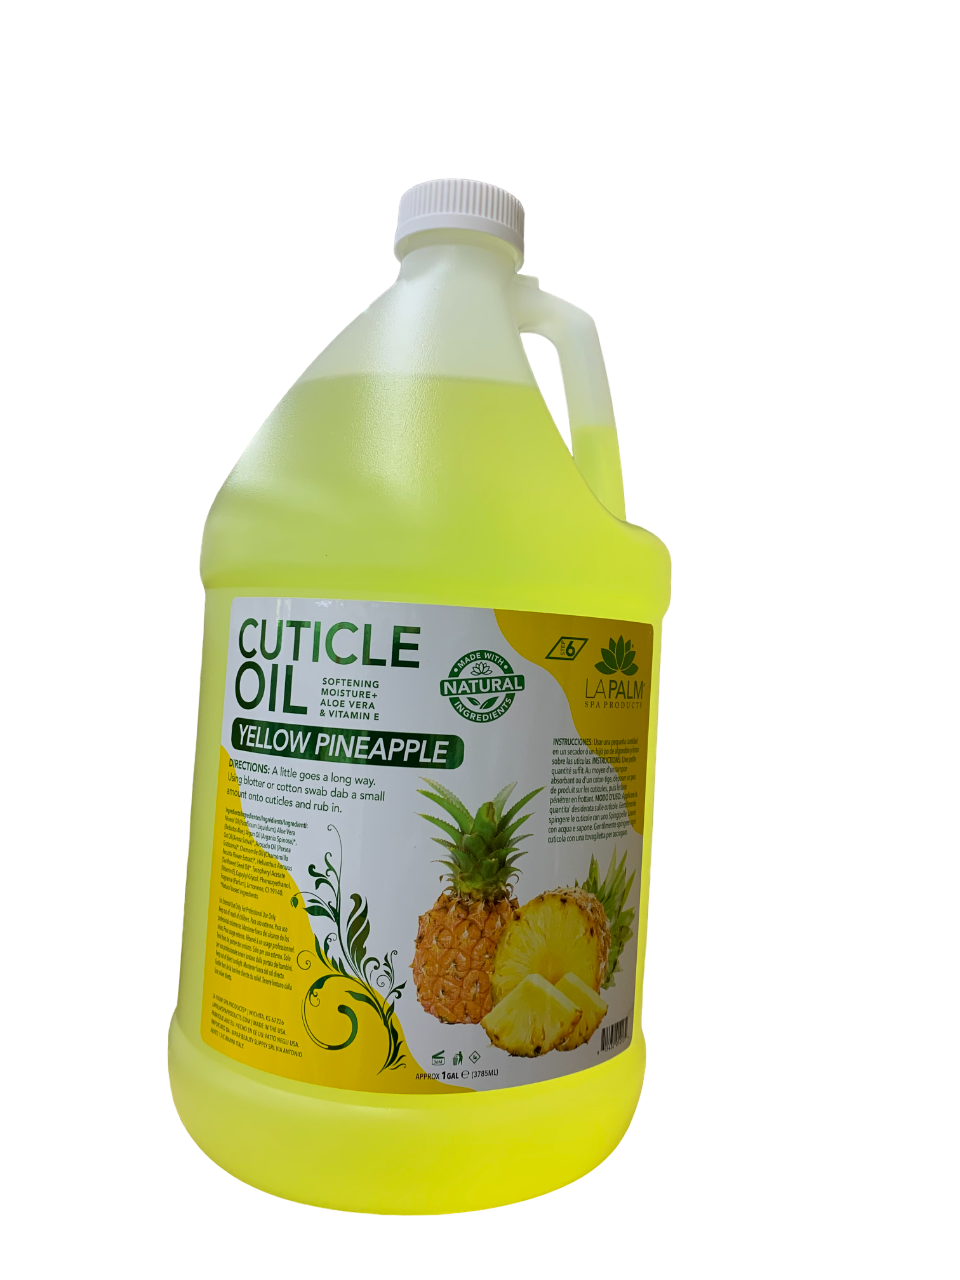 Lapalm Cuticle Oil Yellow Pineapple